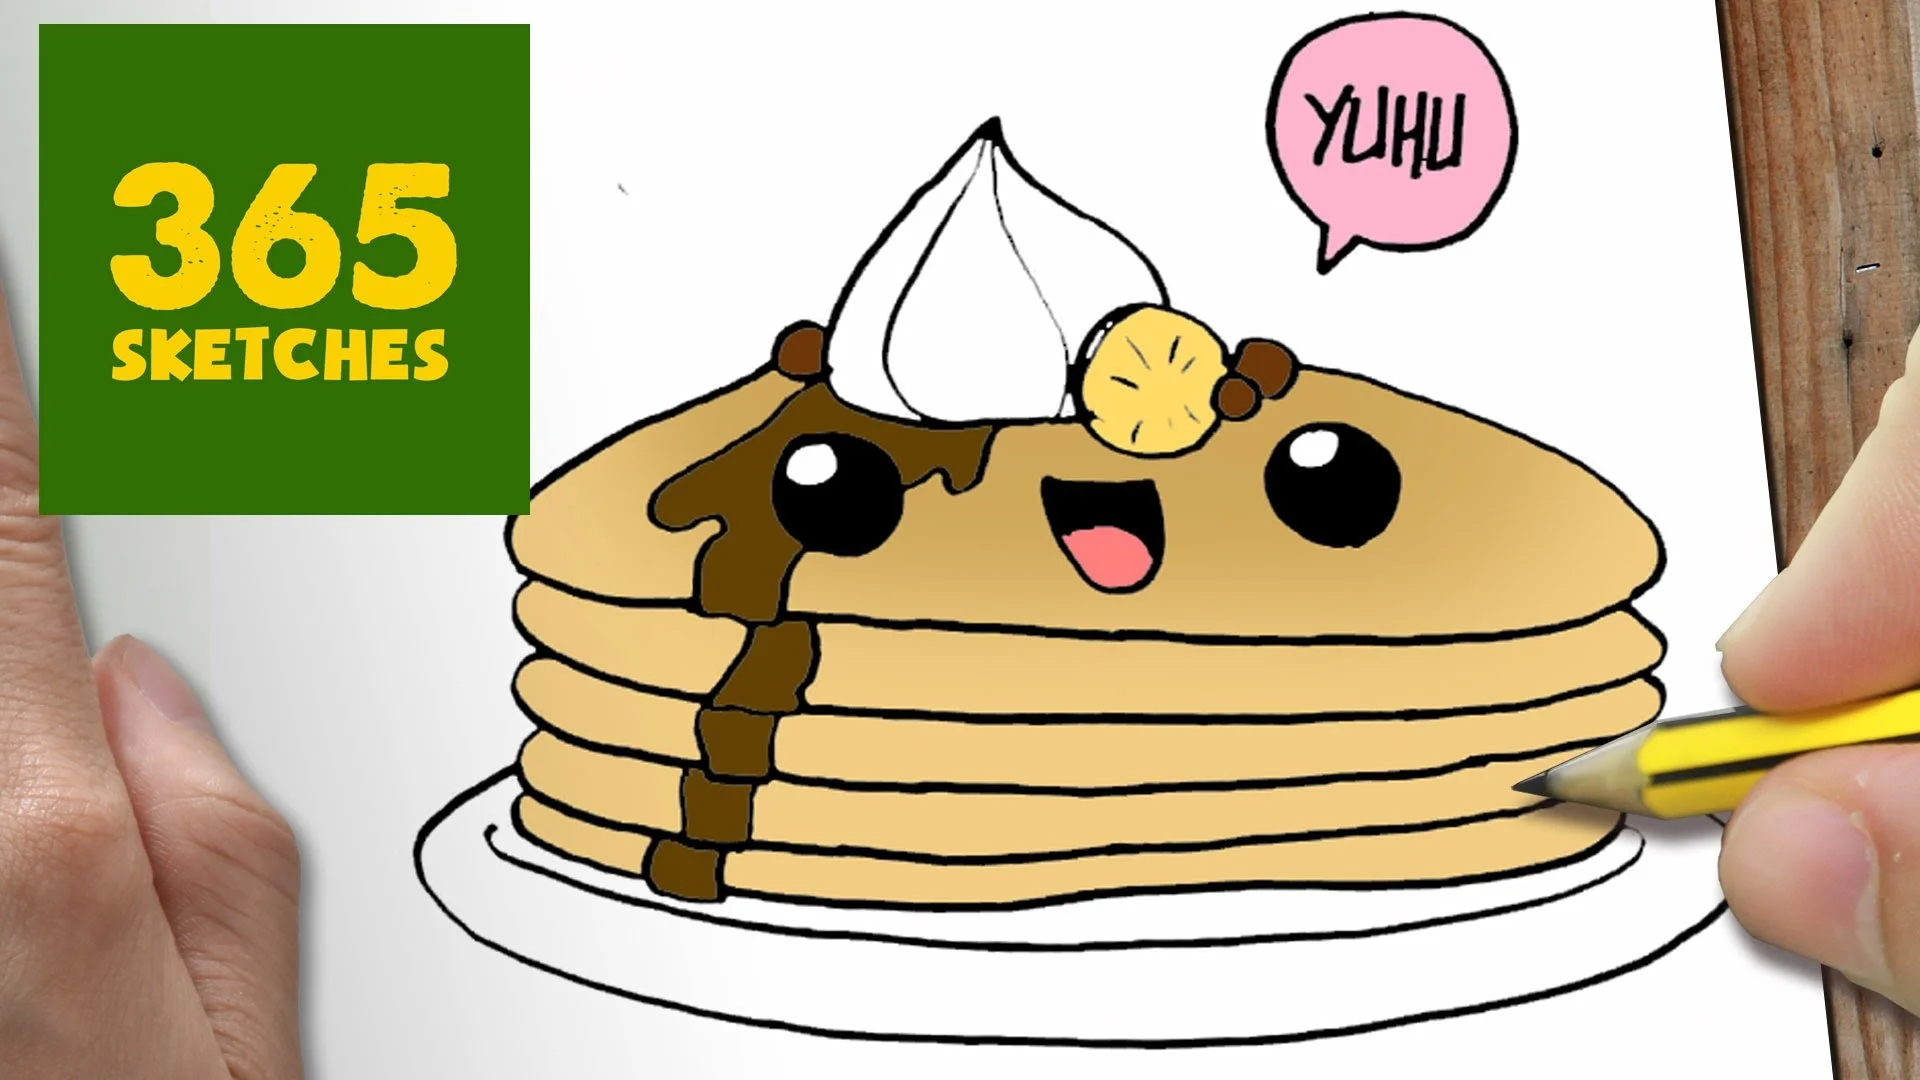 HOW TO DRAW A PANCAKE CUTE, Easy step by step drawing lessons for kids